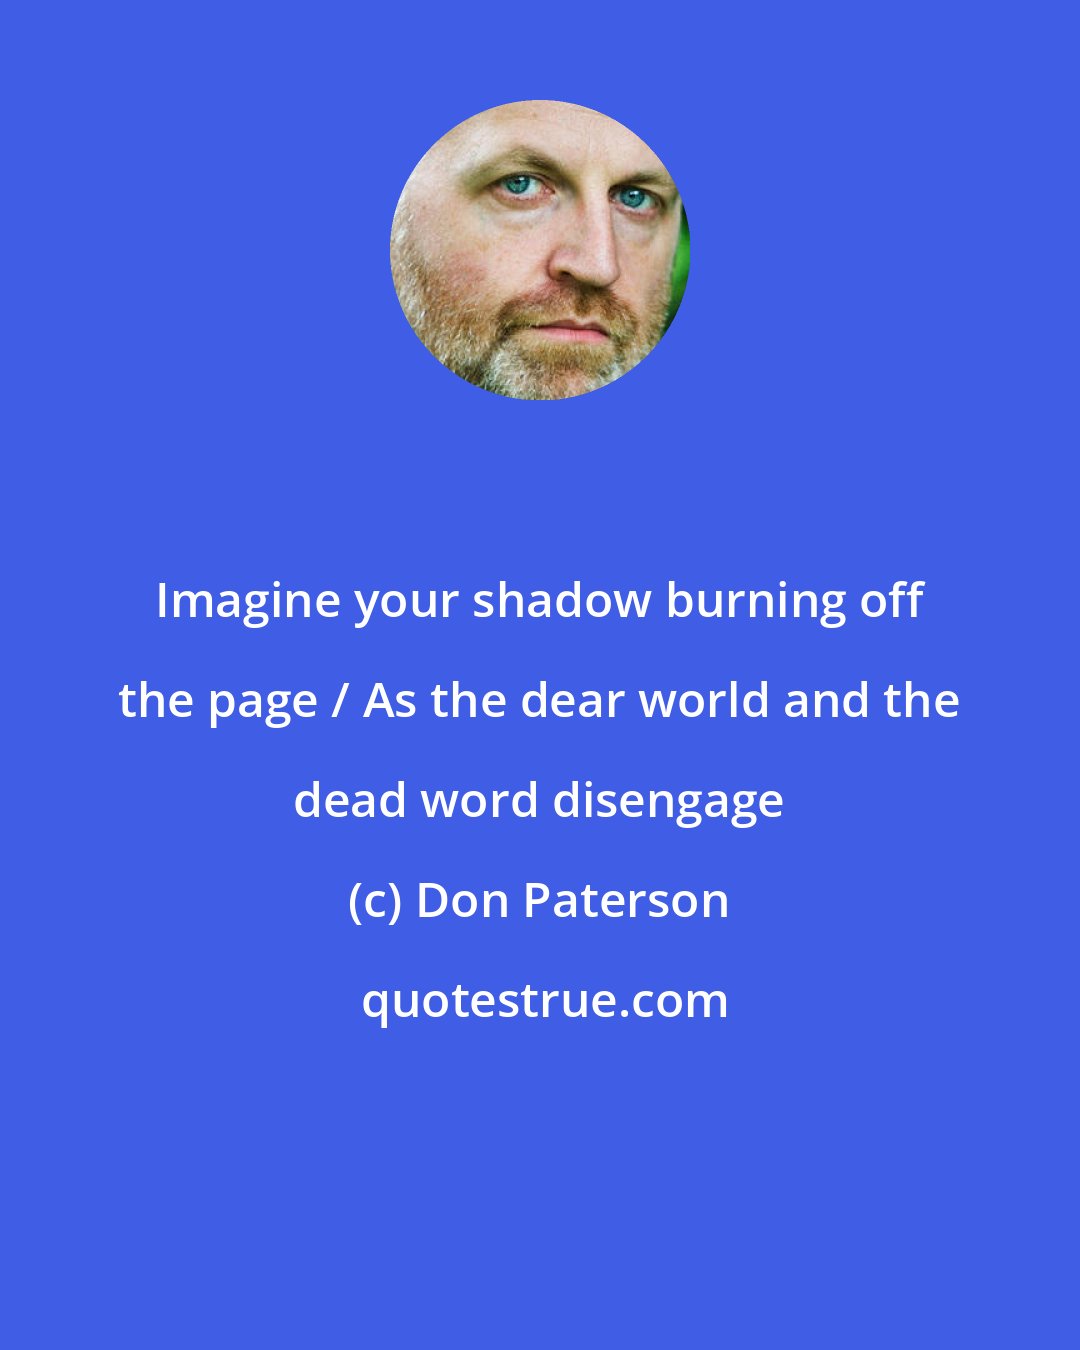 Don Paterson: Imagine your shadow burning off the page / As the dear world and the dead word disengage